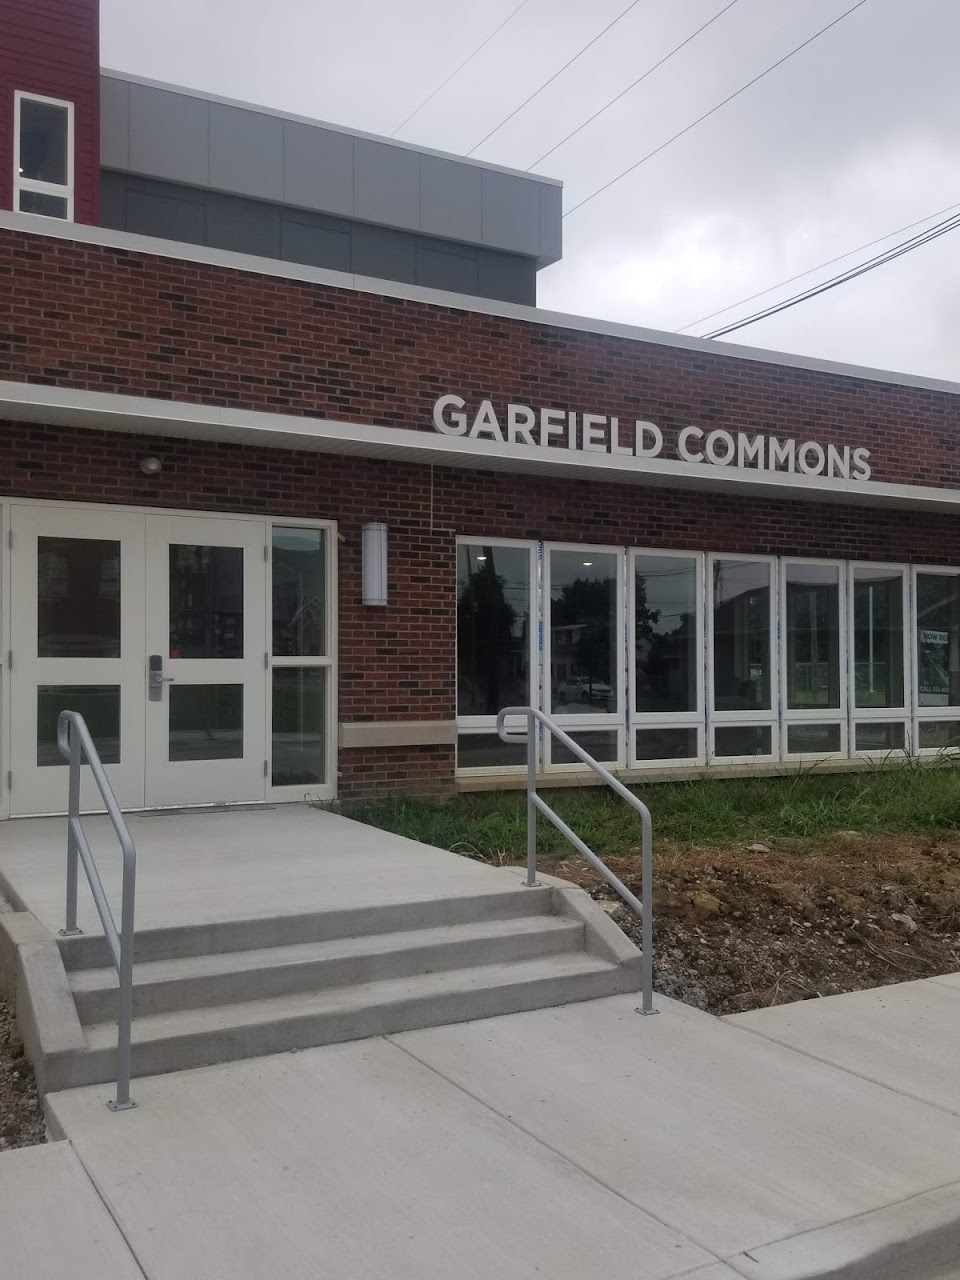 Photo of GARFIELD COMMONS. Affordable housing located at 422 GARFIELD AVE EVANSVILLE, IN 47710